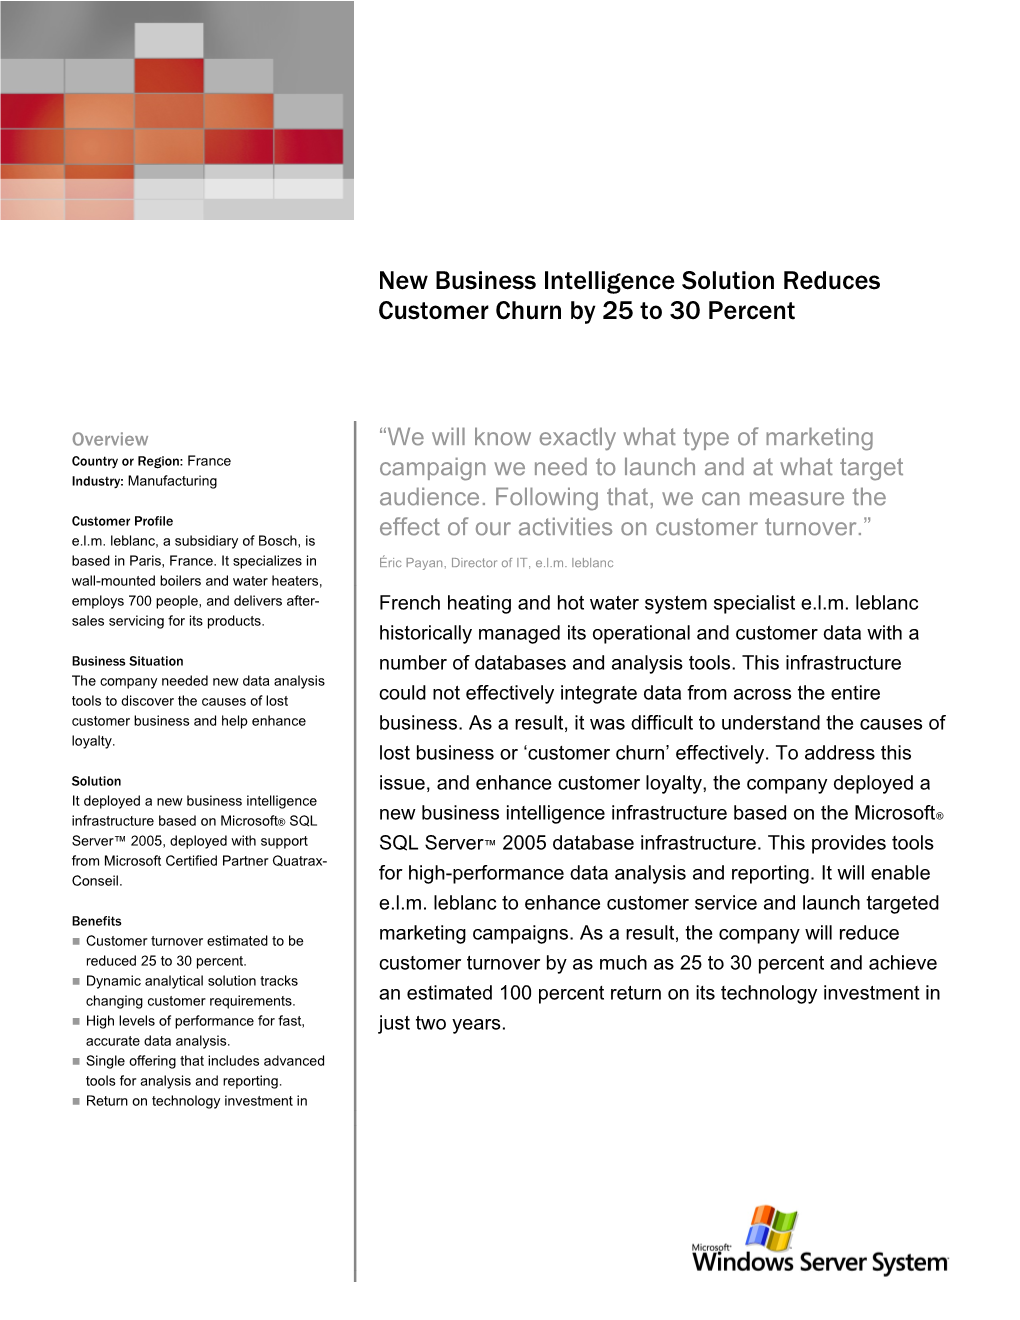 New Business Intelligence Solution Reduces Customer Churn by 25 to 30 Percent